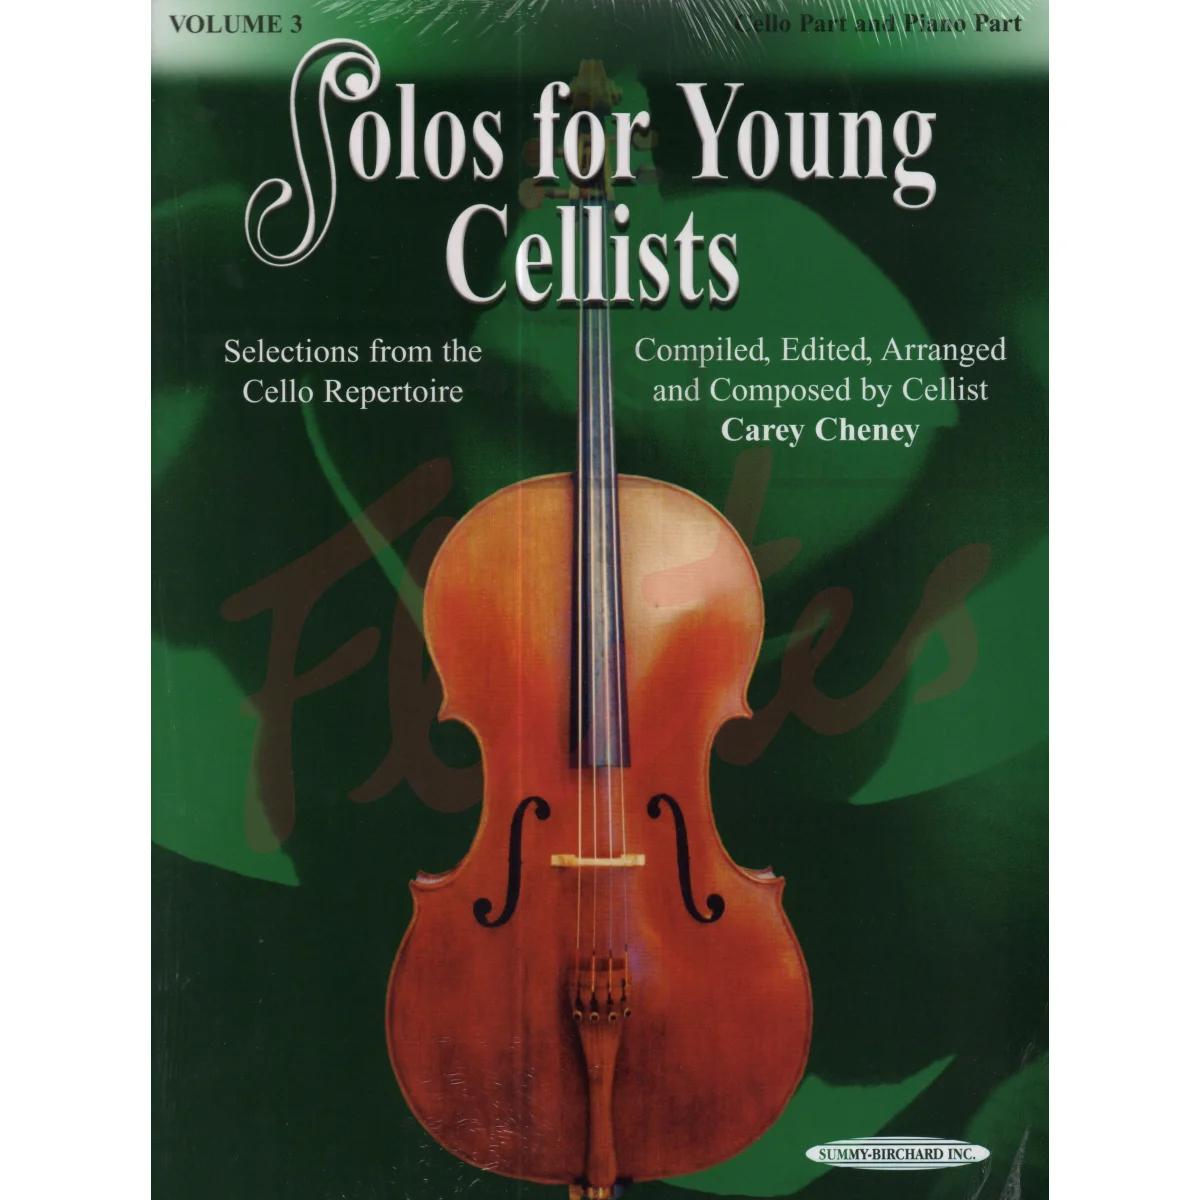 Solos for Young Cellists Vol 3